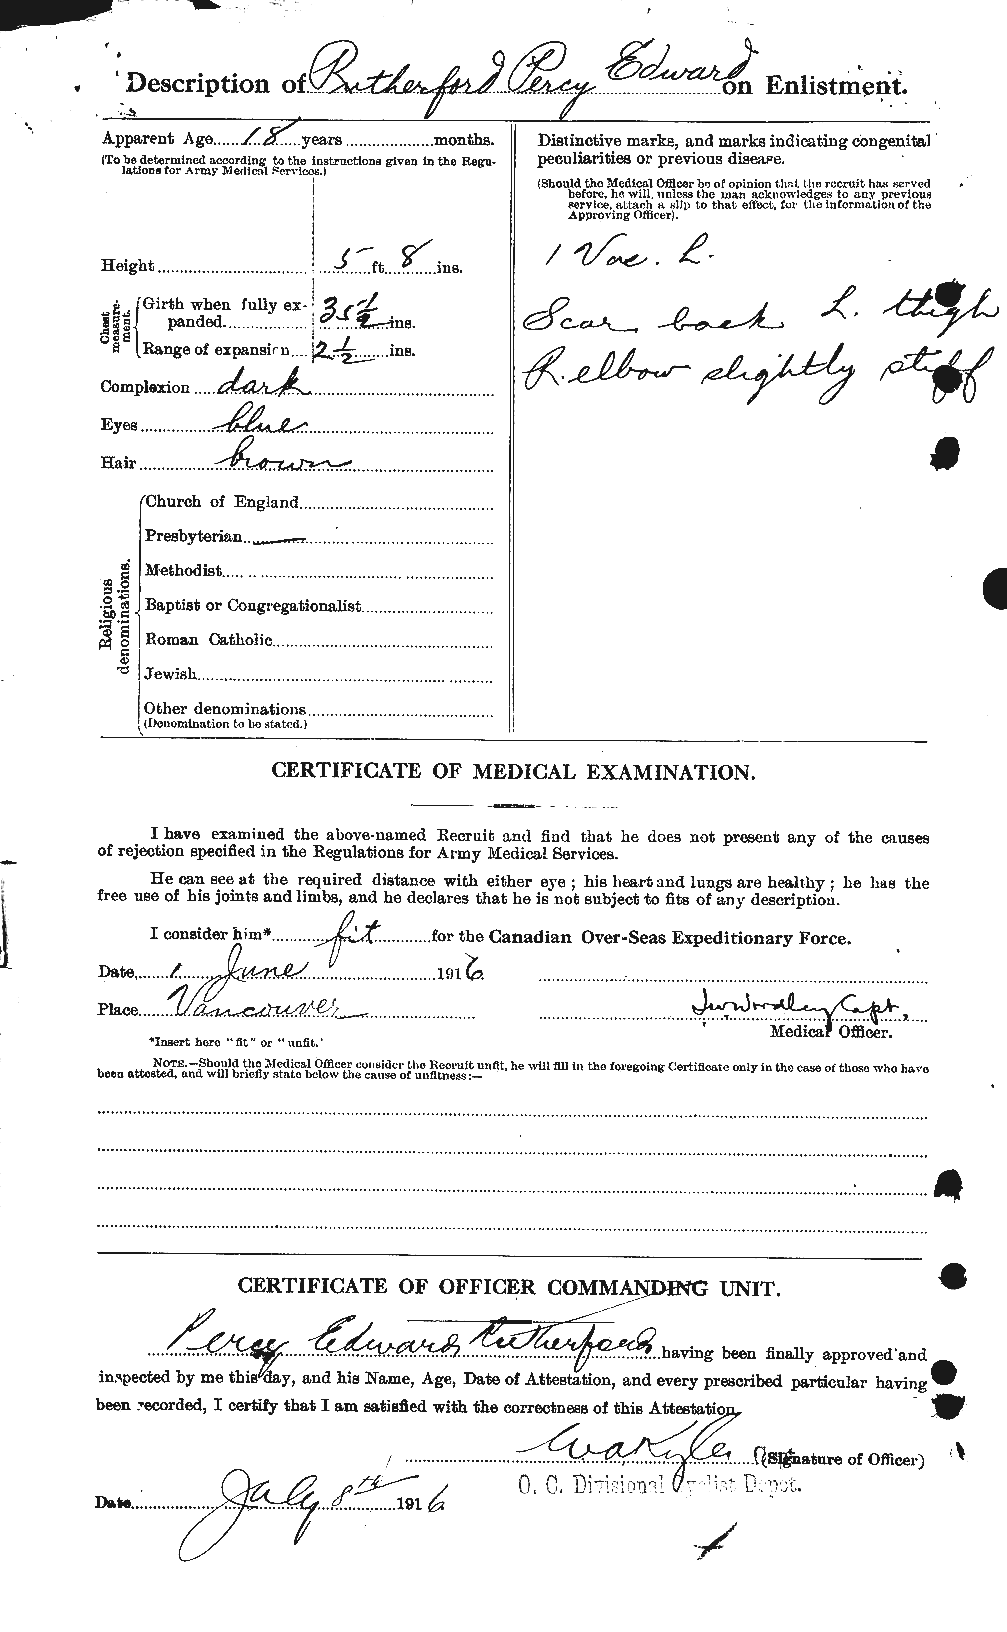 Personnel Records of the First World War - CEF 620668b